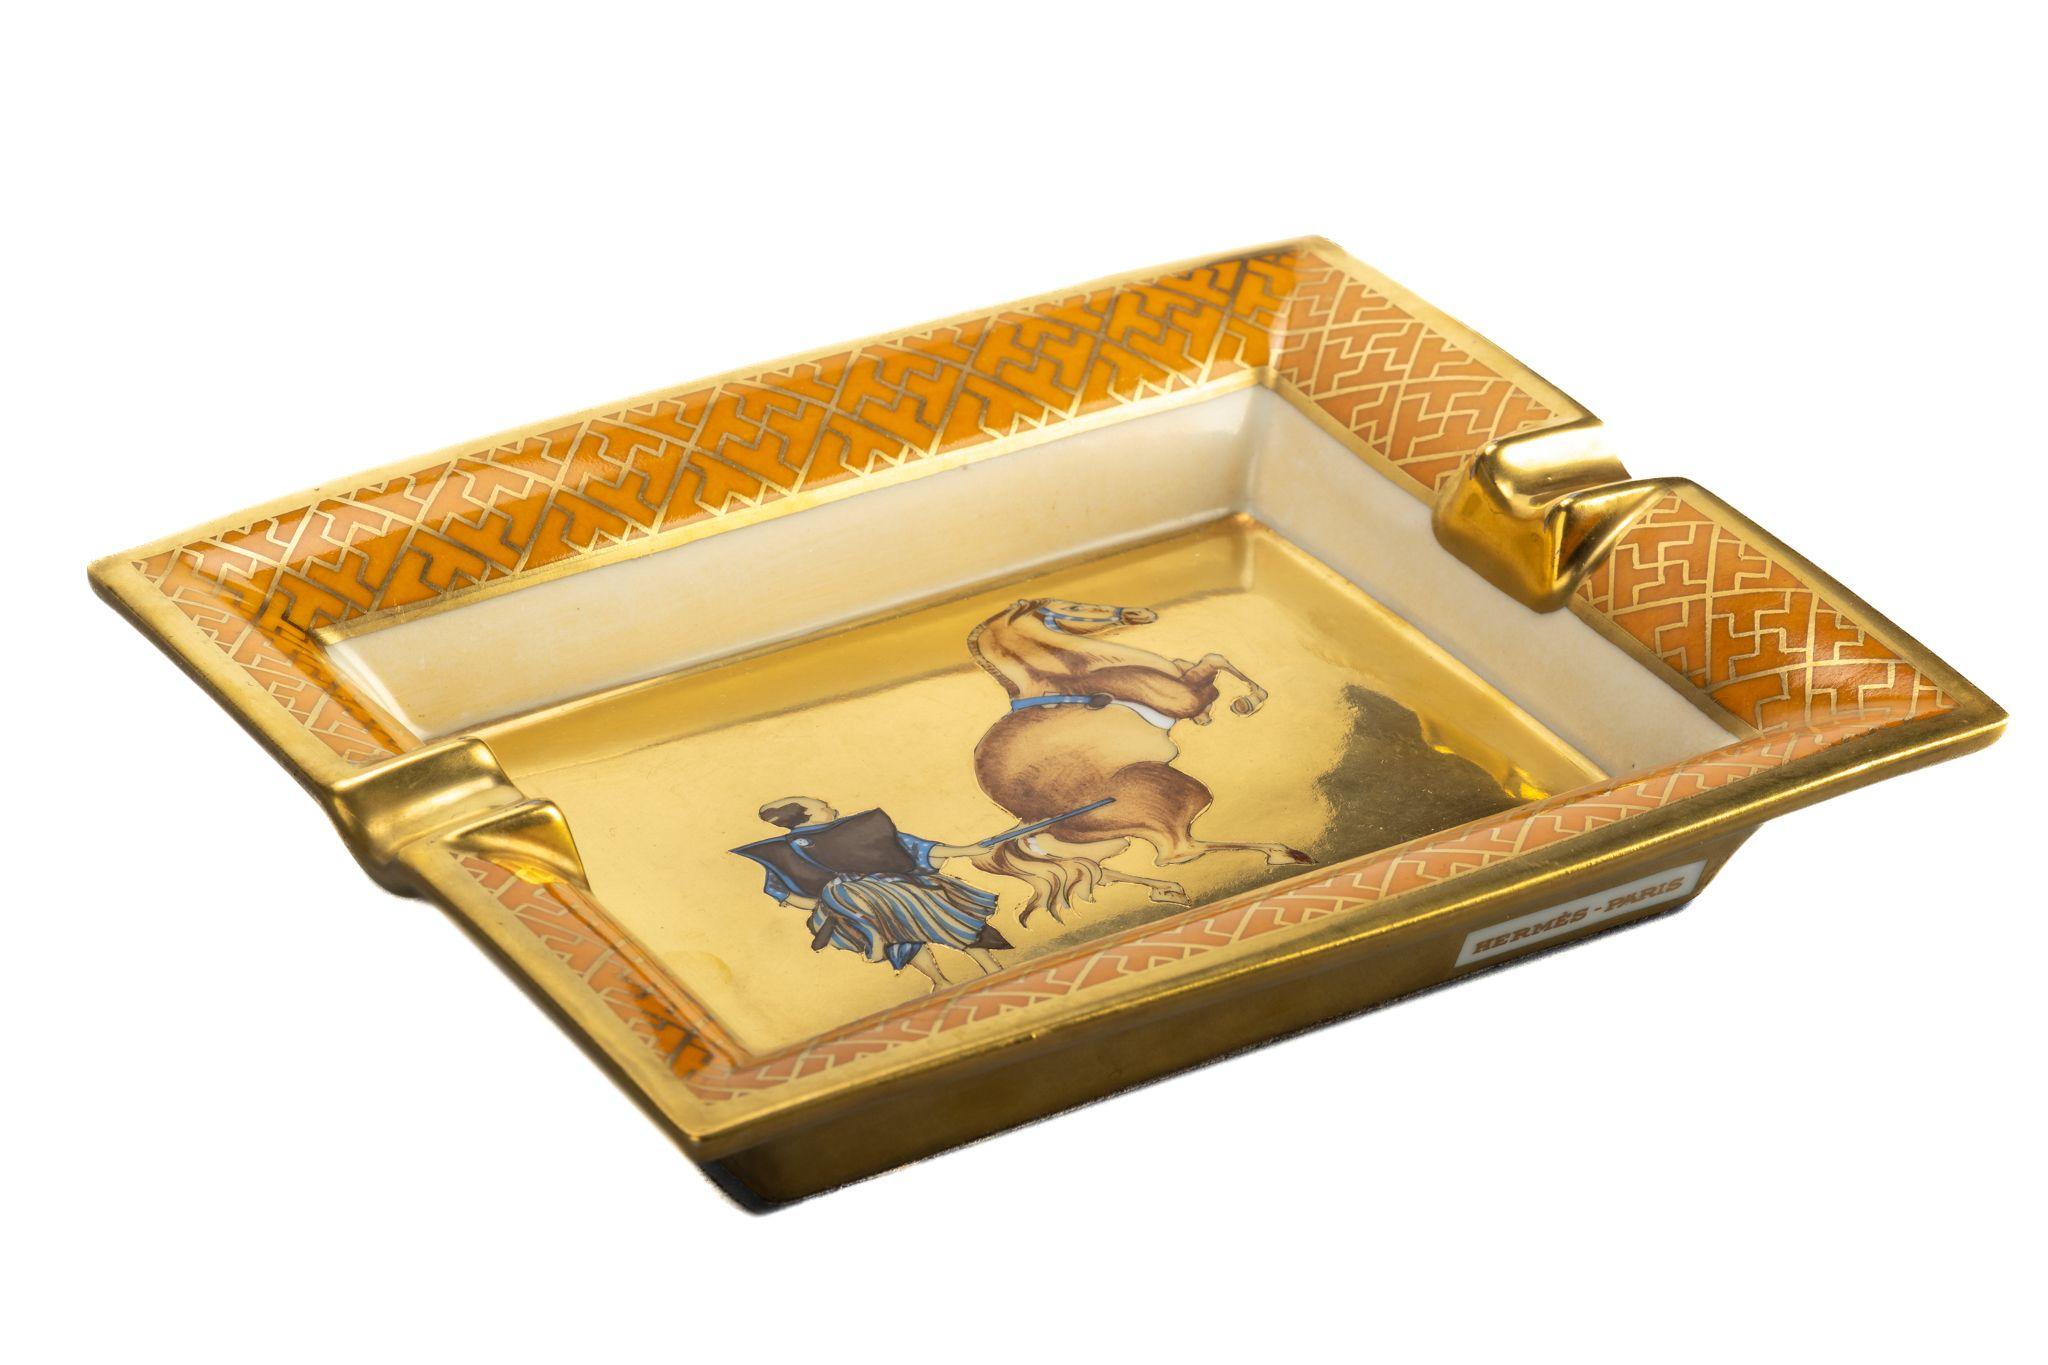 Hermes signature ashtray with samurai with horse design in yellow and gold. Suede stamped bottom. Minor wear on it. Made in France. Comes with original box.